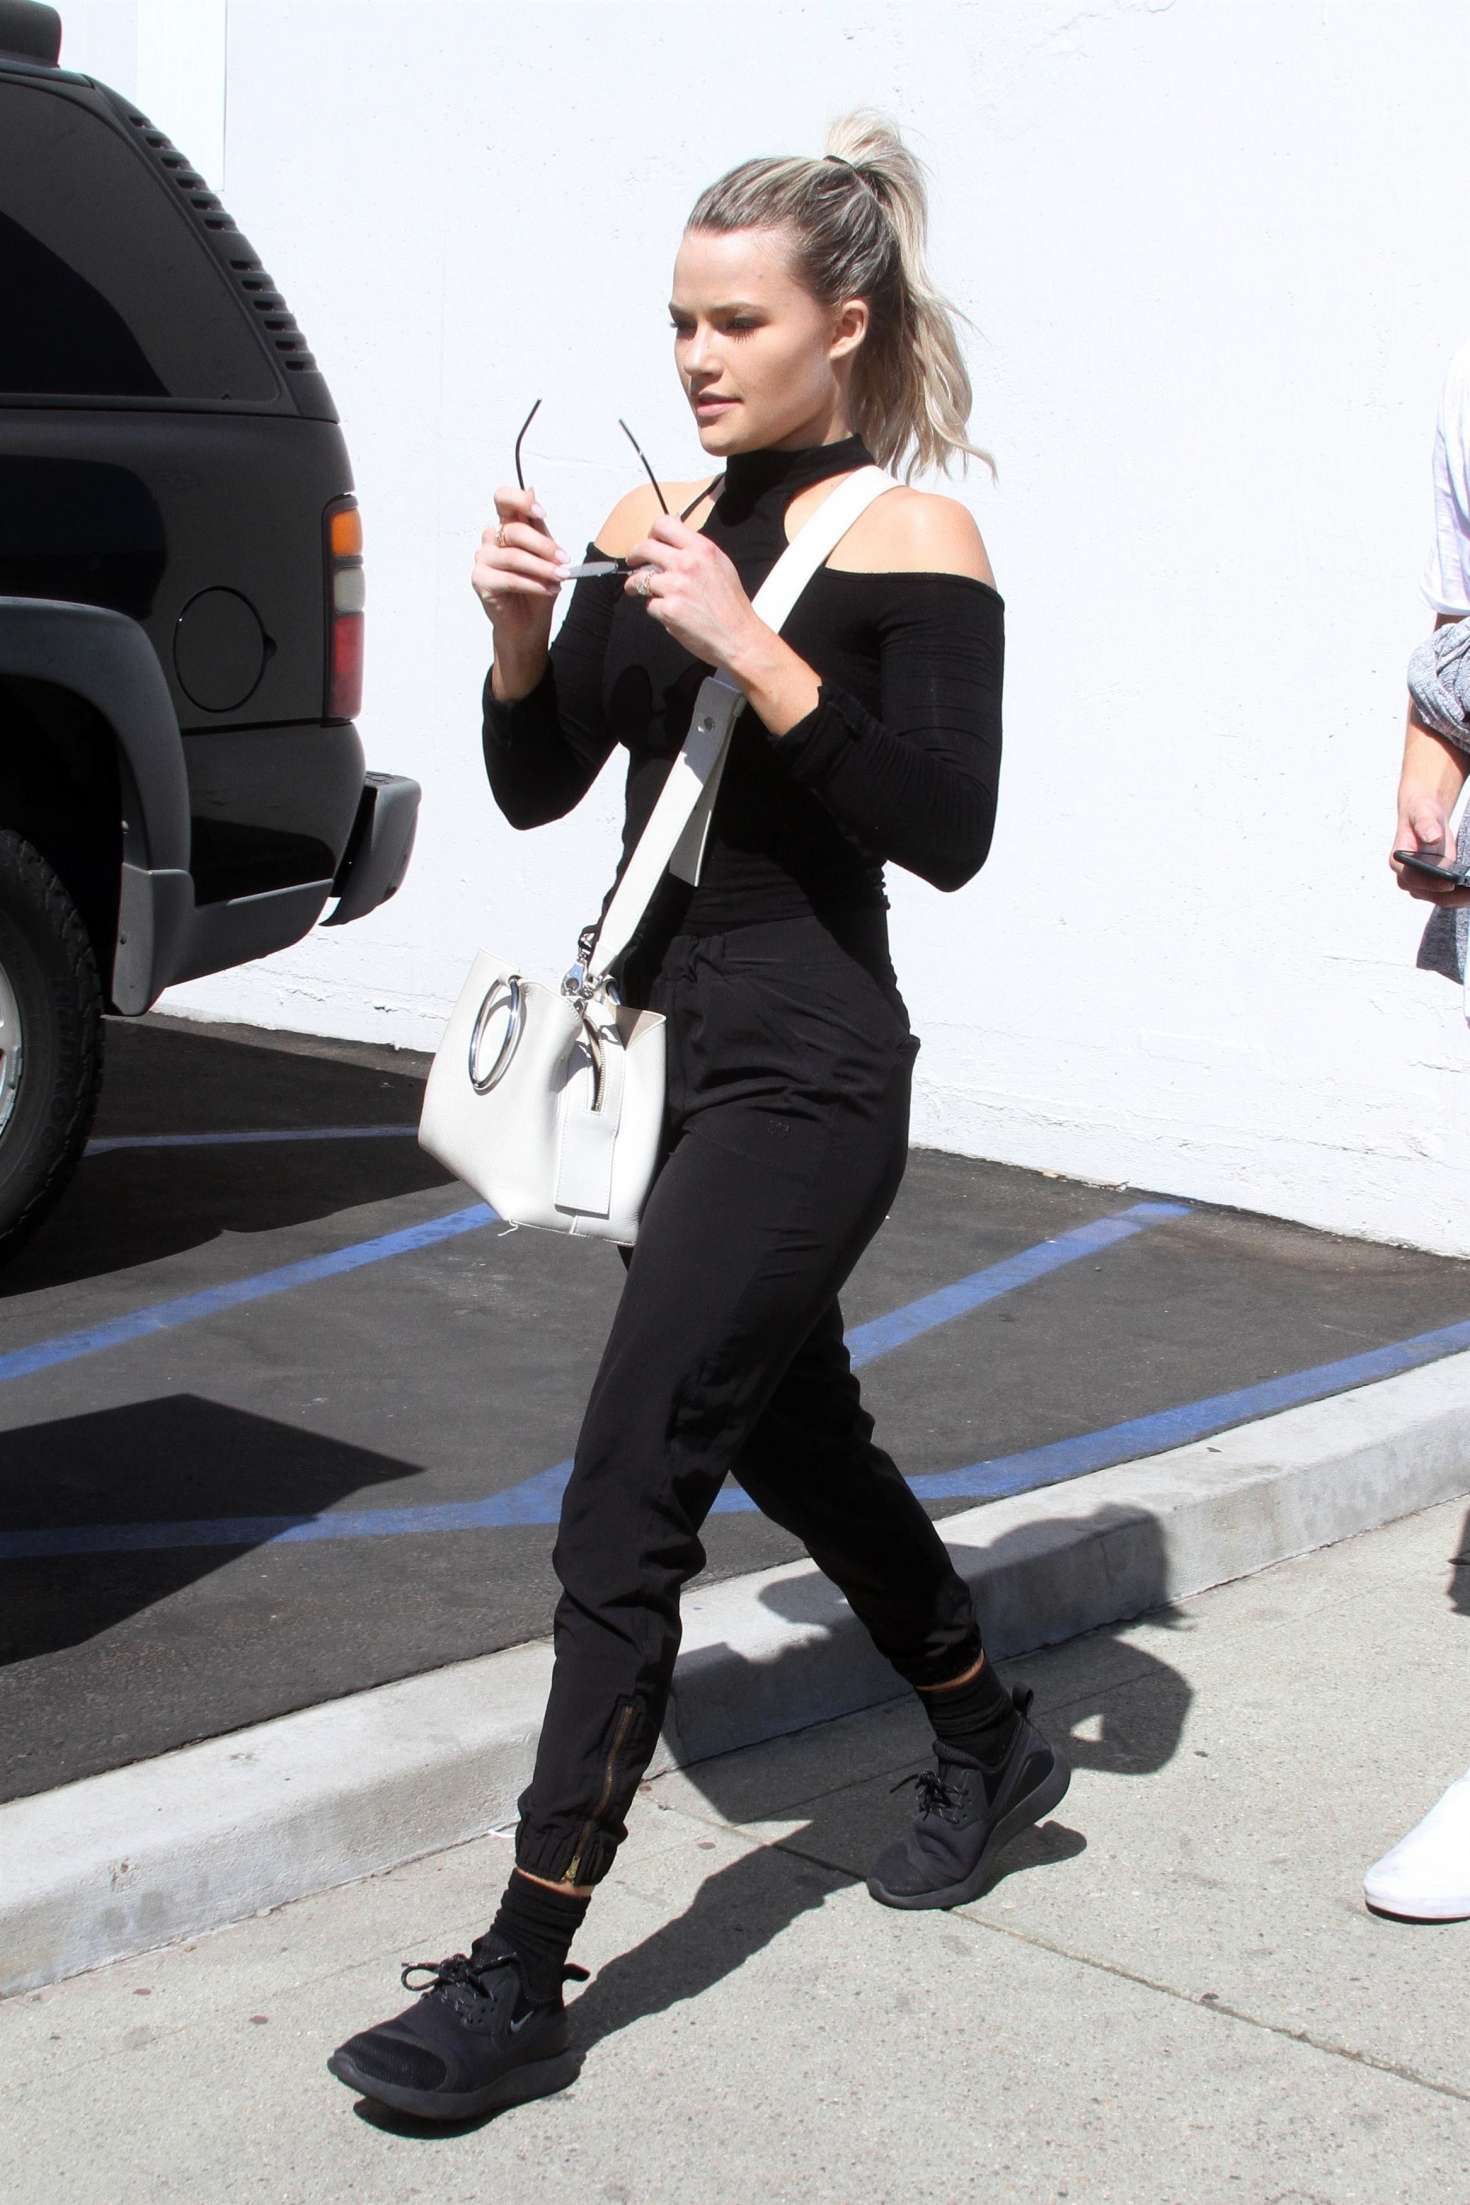 Witney Carson at the DWTS studio in Los Angeles